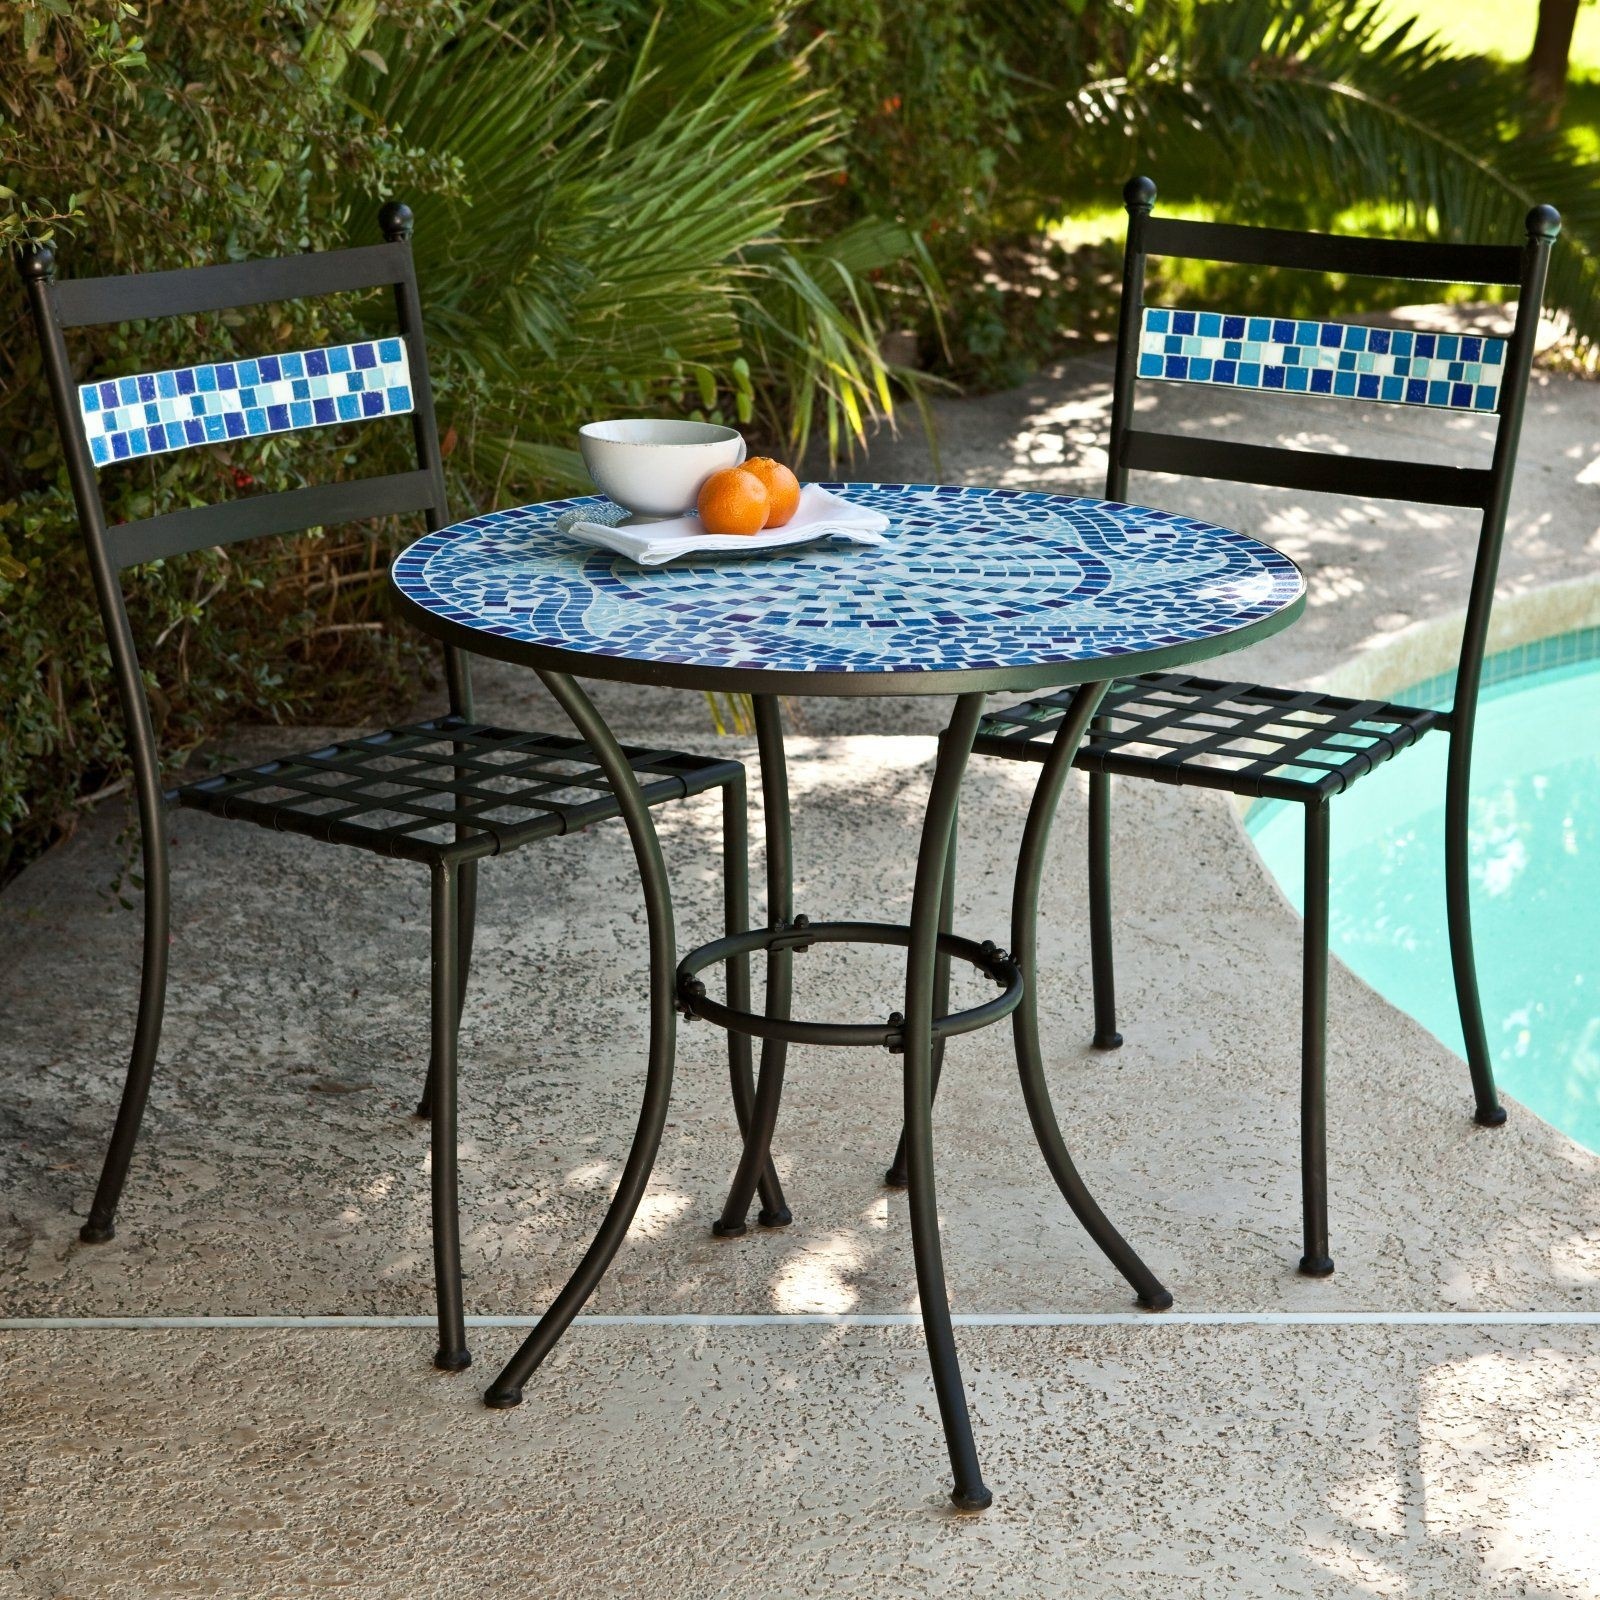 Vevelux Mosaic Outdoor Patio Bistro Table Blue and White 23.6 Ceramic for Garden Bar Backyard Deck Balcony Lawn Pool Home Poolside 